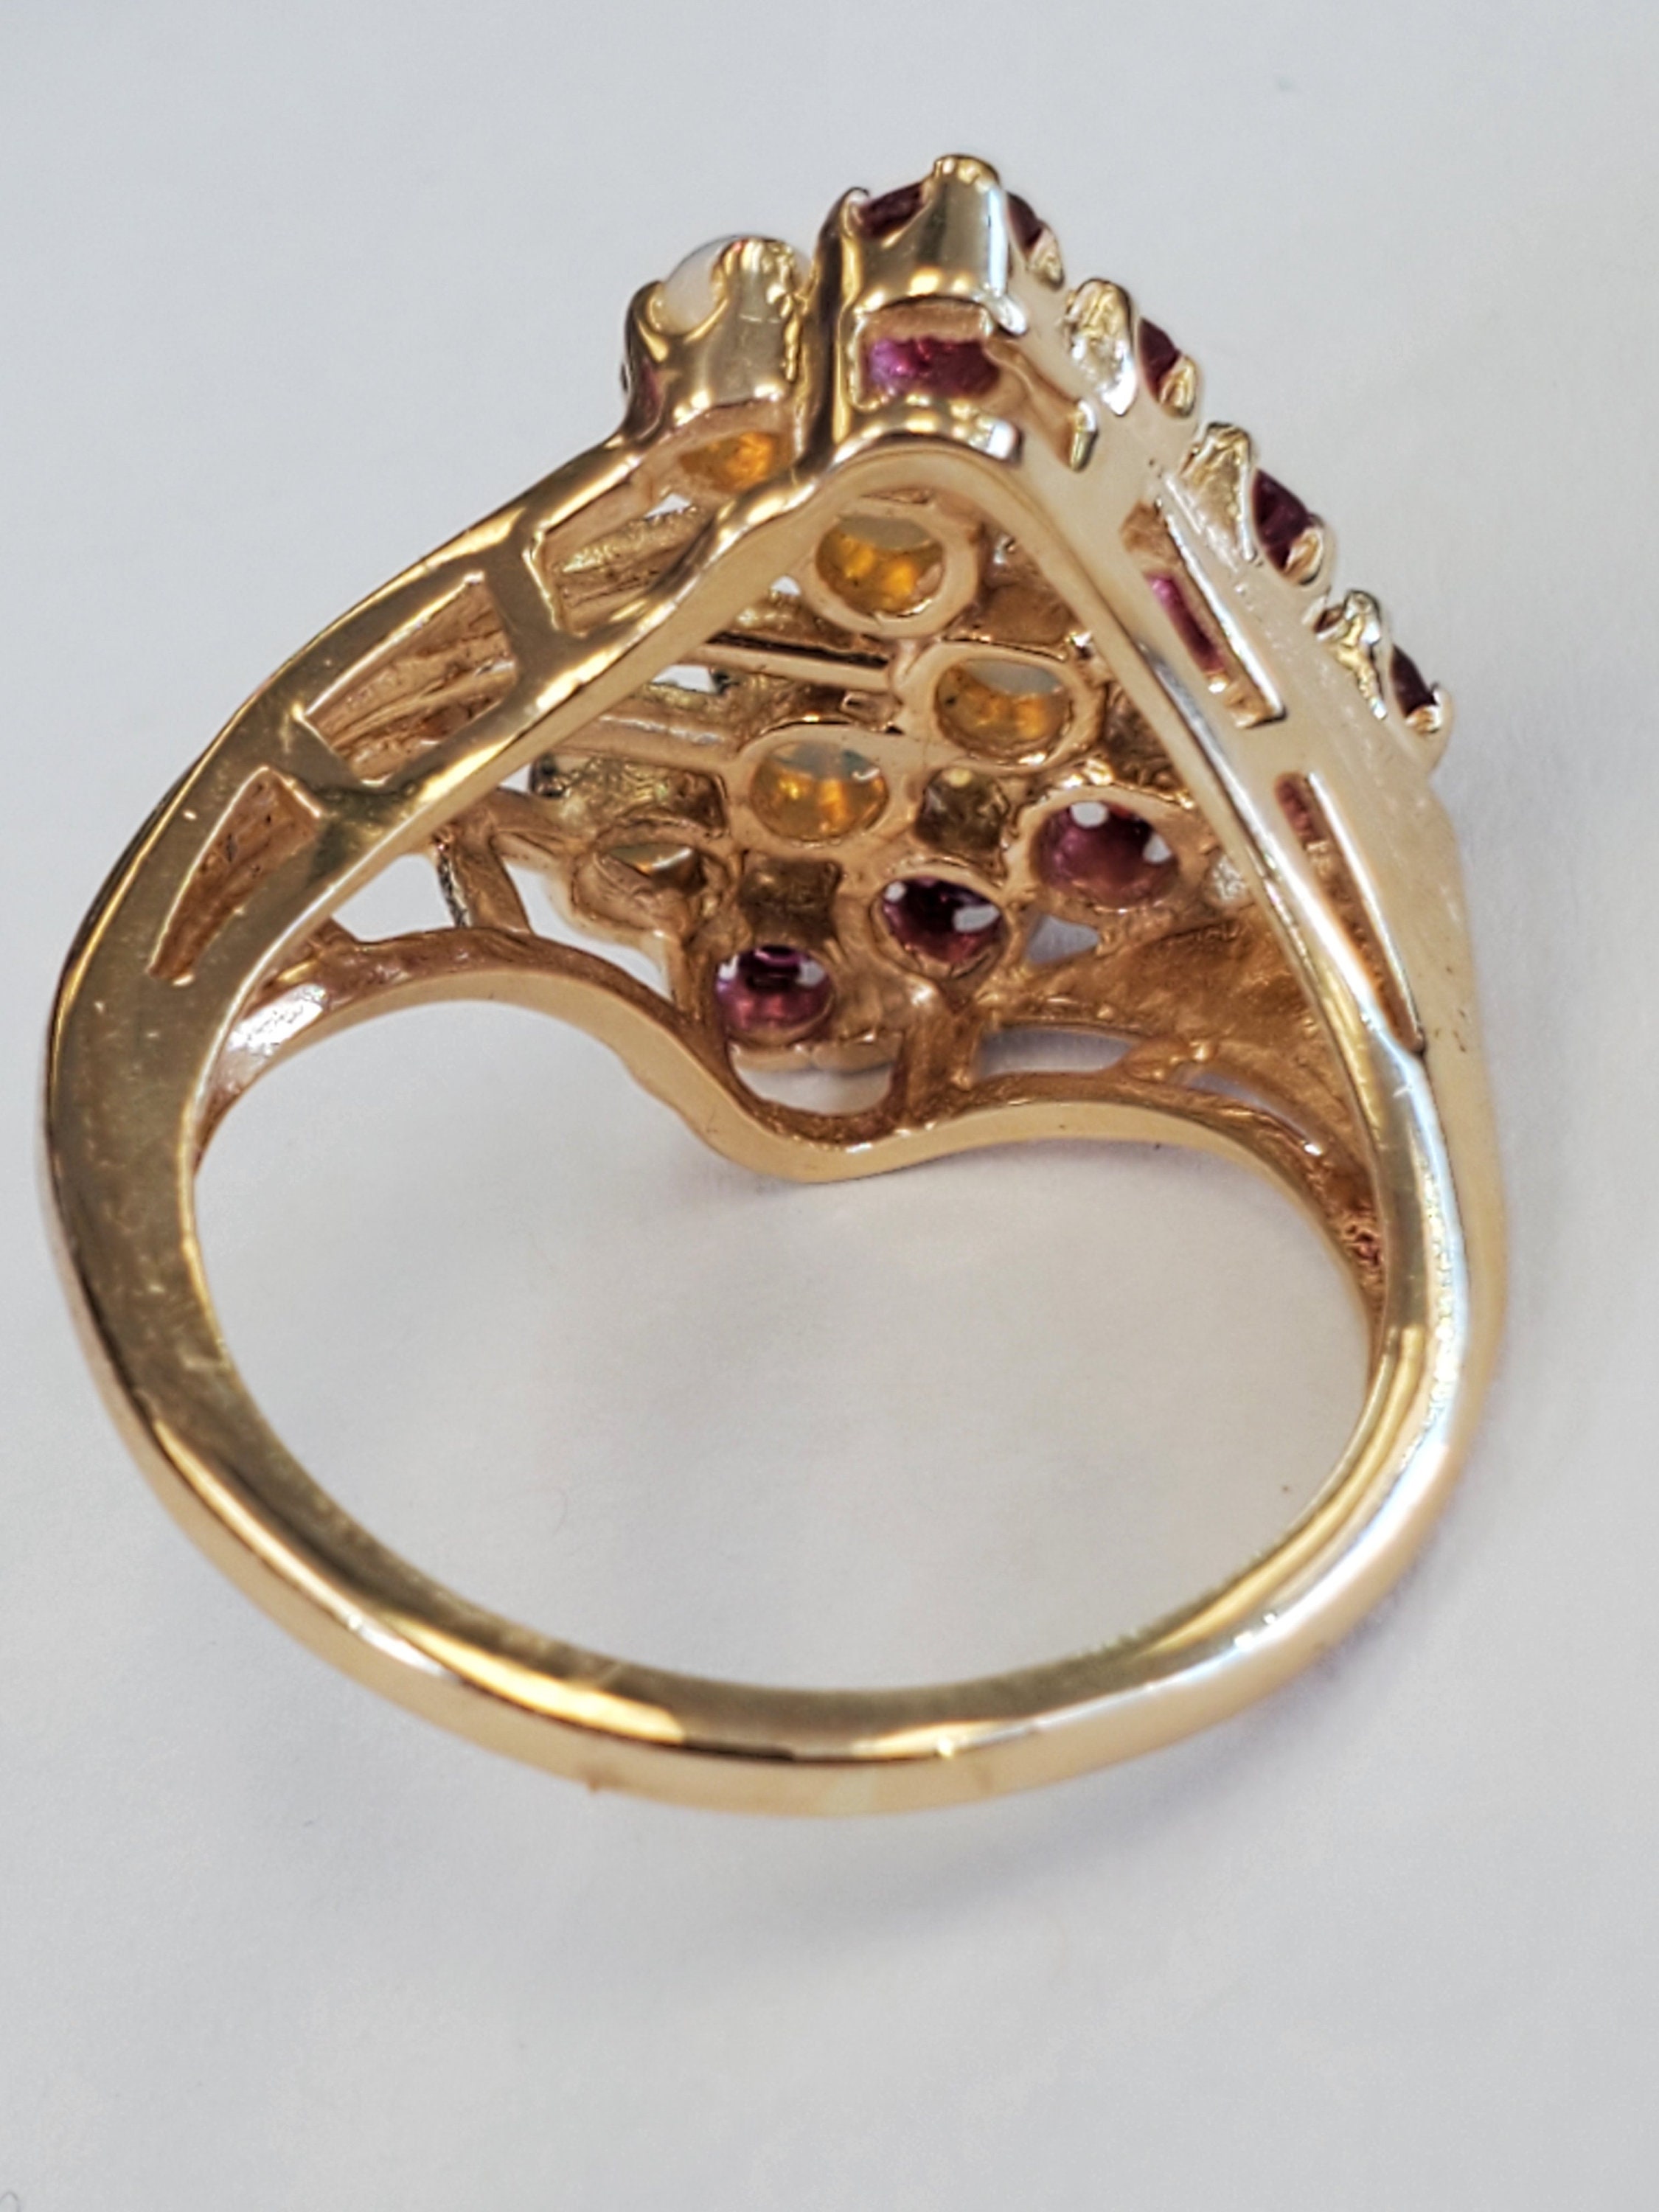 Product Image for SECO Retro ruby and opal 14k yellow gold ring size 4.5 Stein & Ellbogen Co.